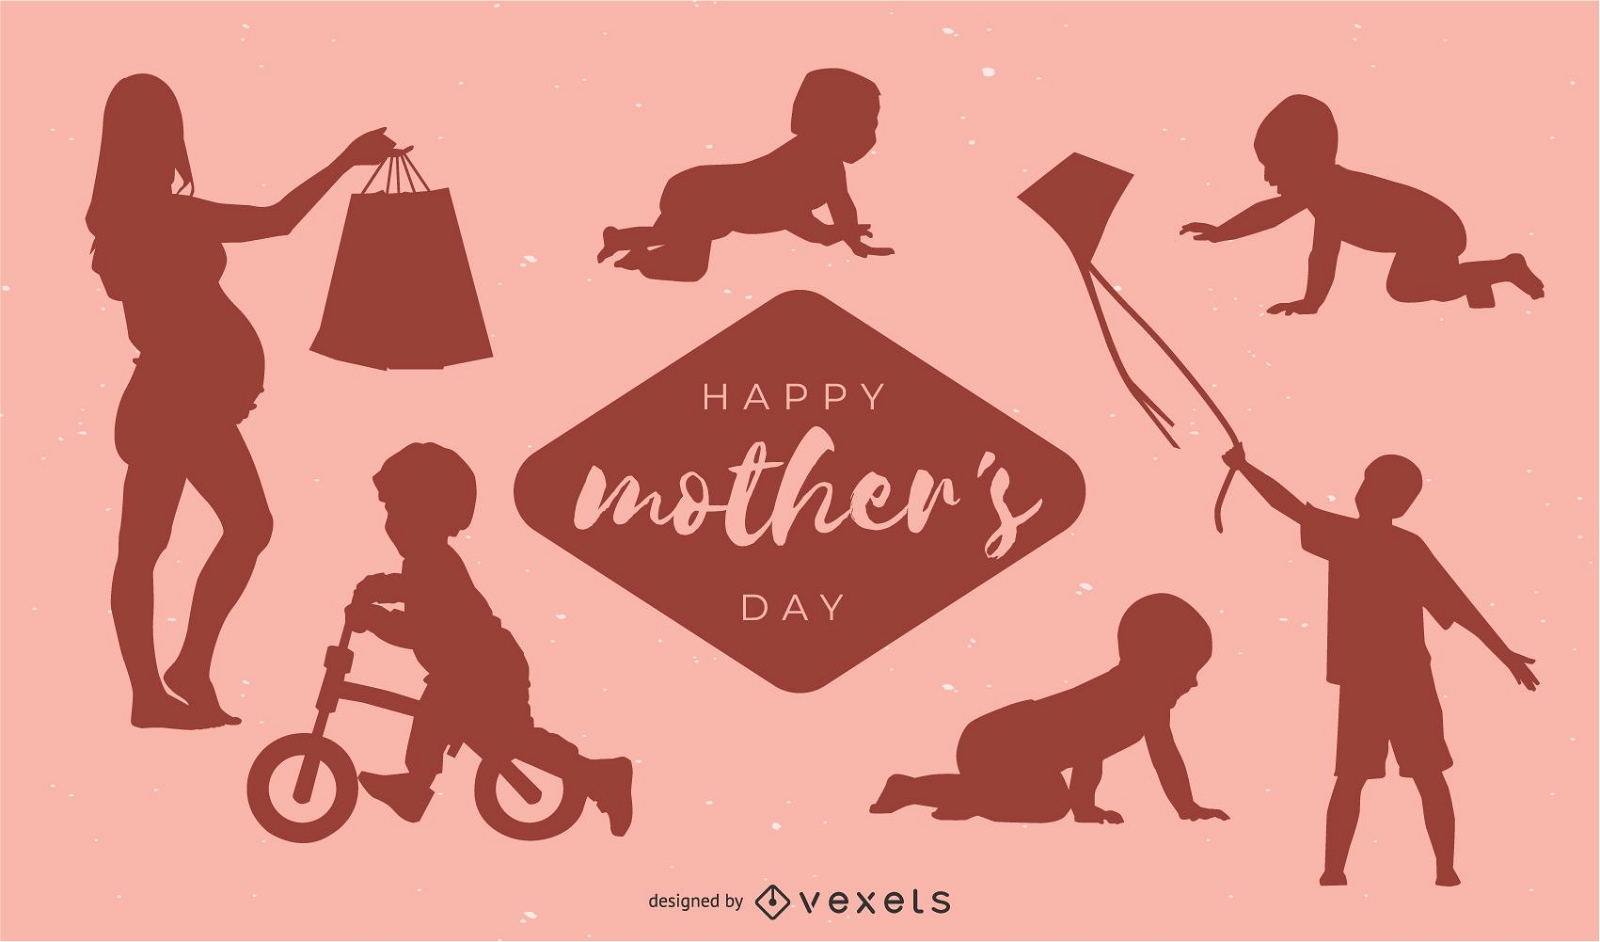 Happy Mother's Day Silhouette Design